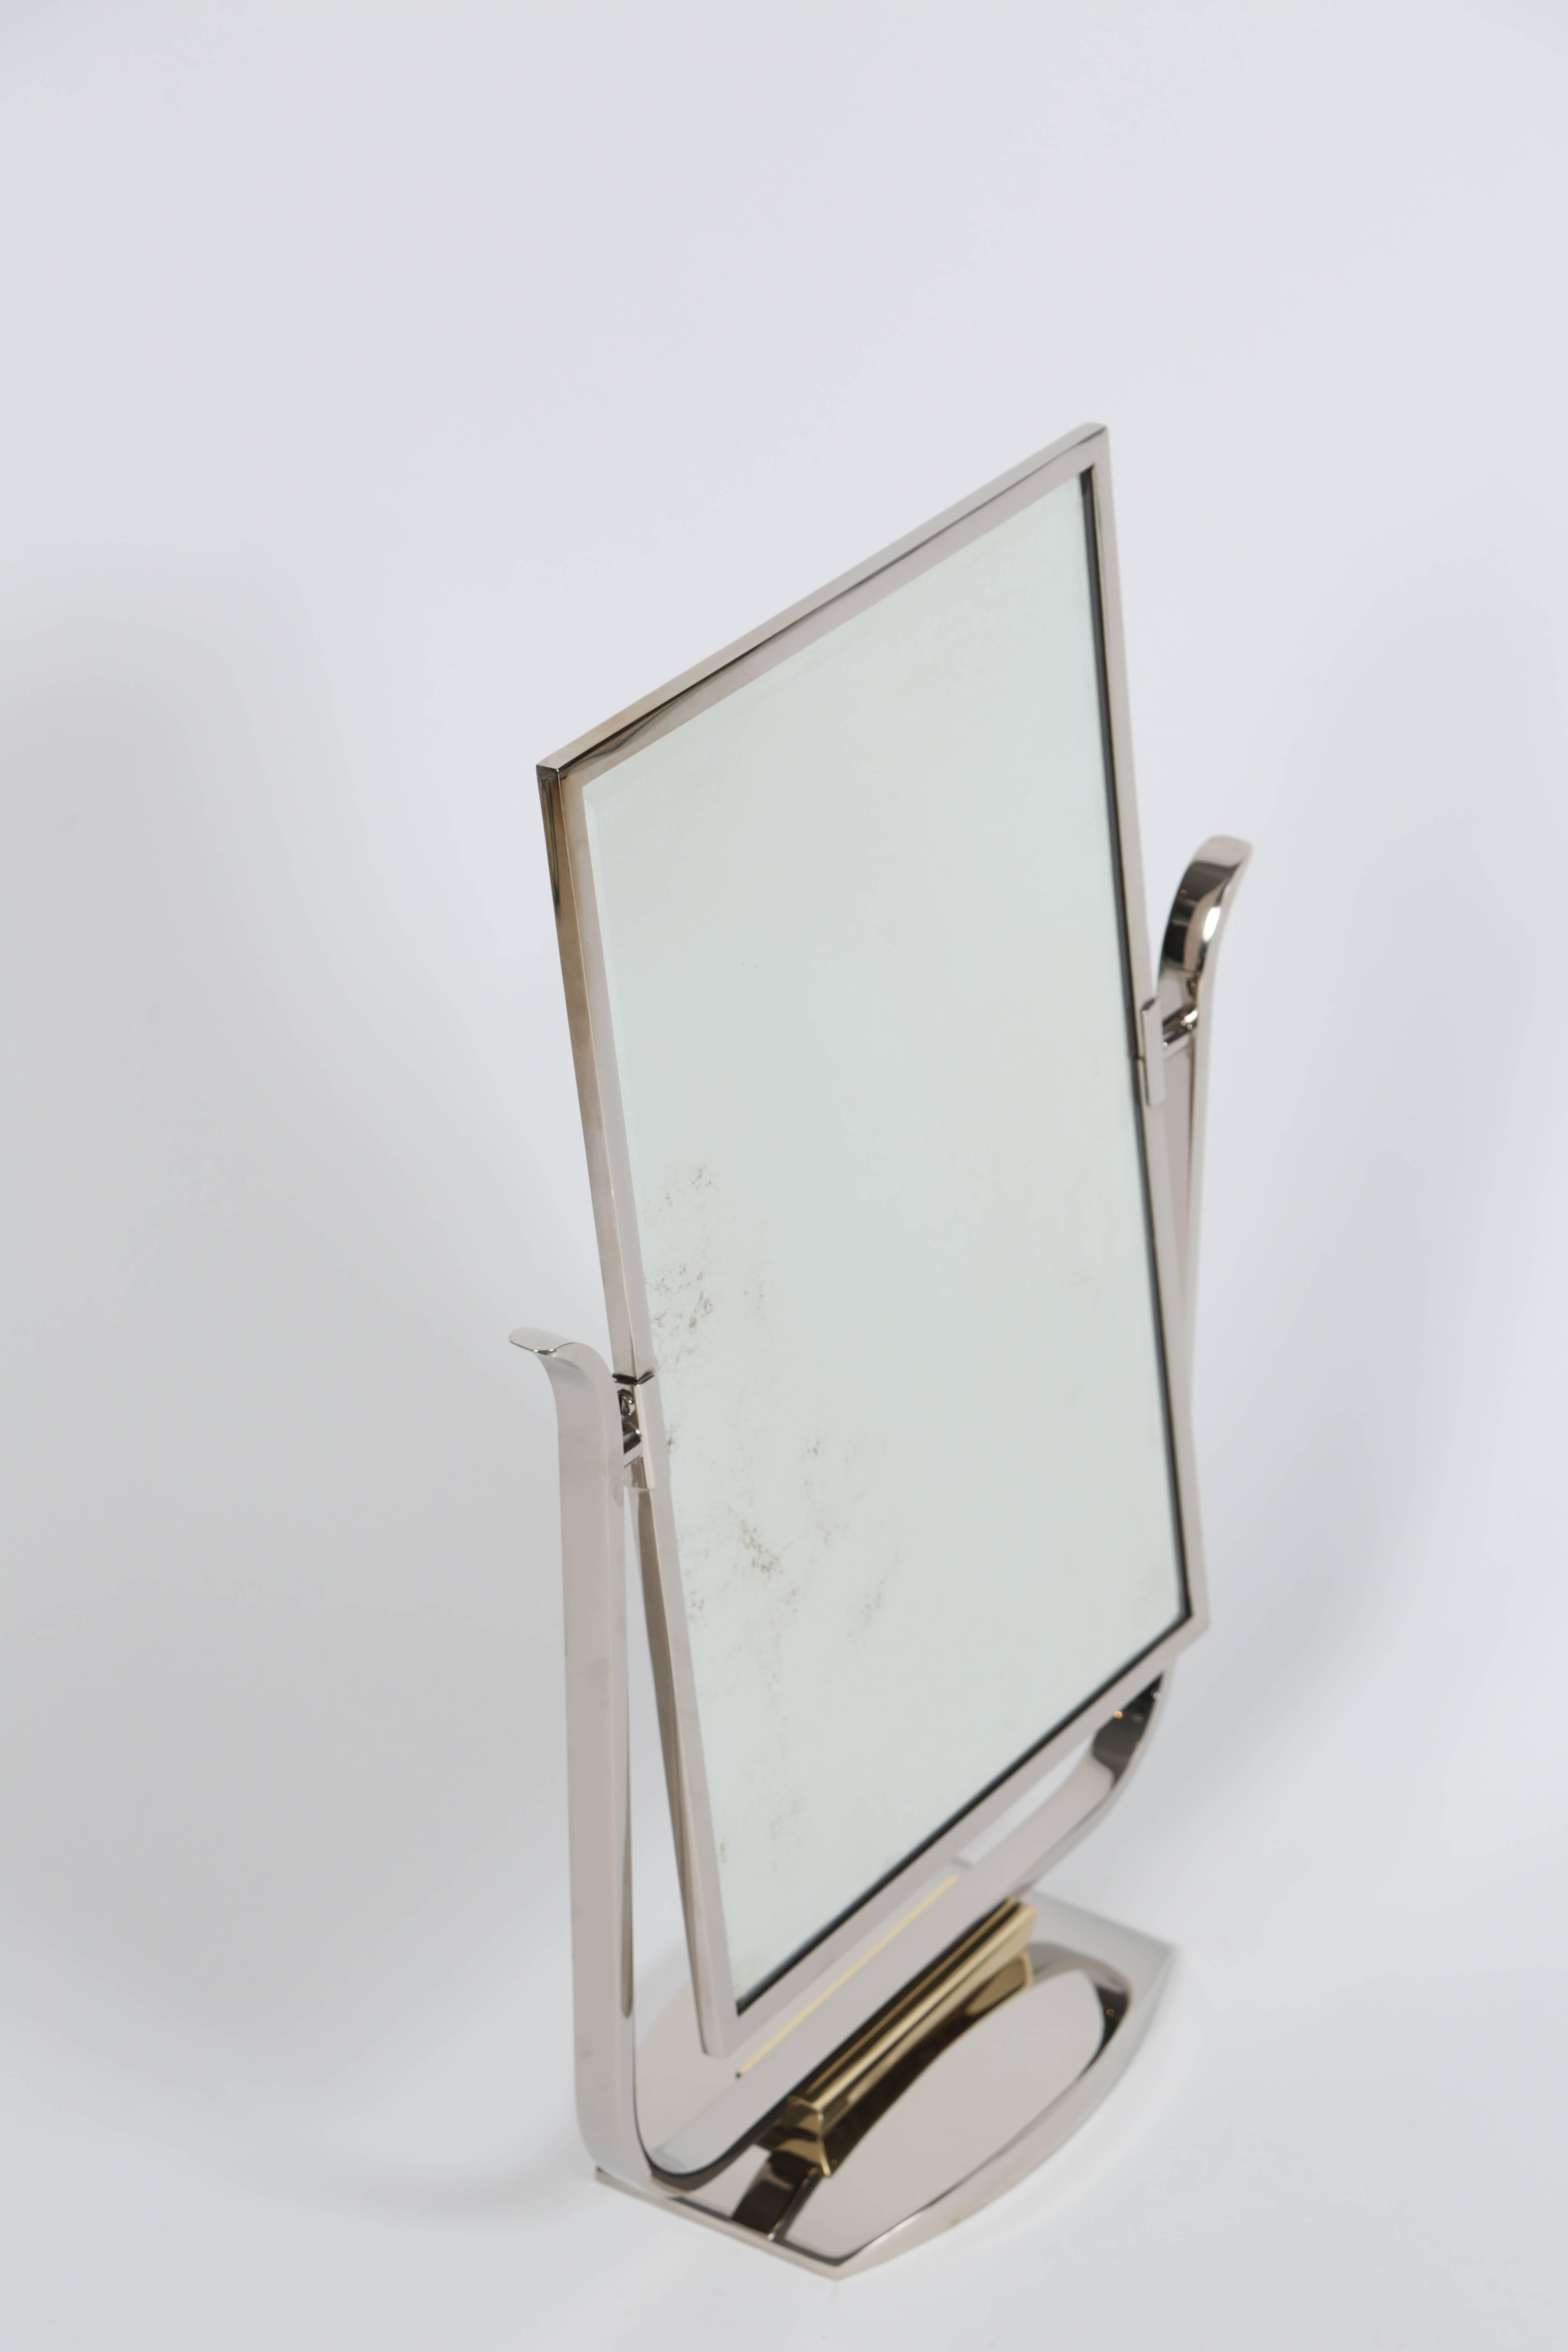 20th Century Art Deco Table Top Mirror in Chrome and Polished Brass For Sale